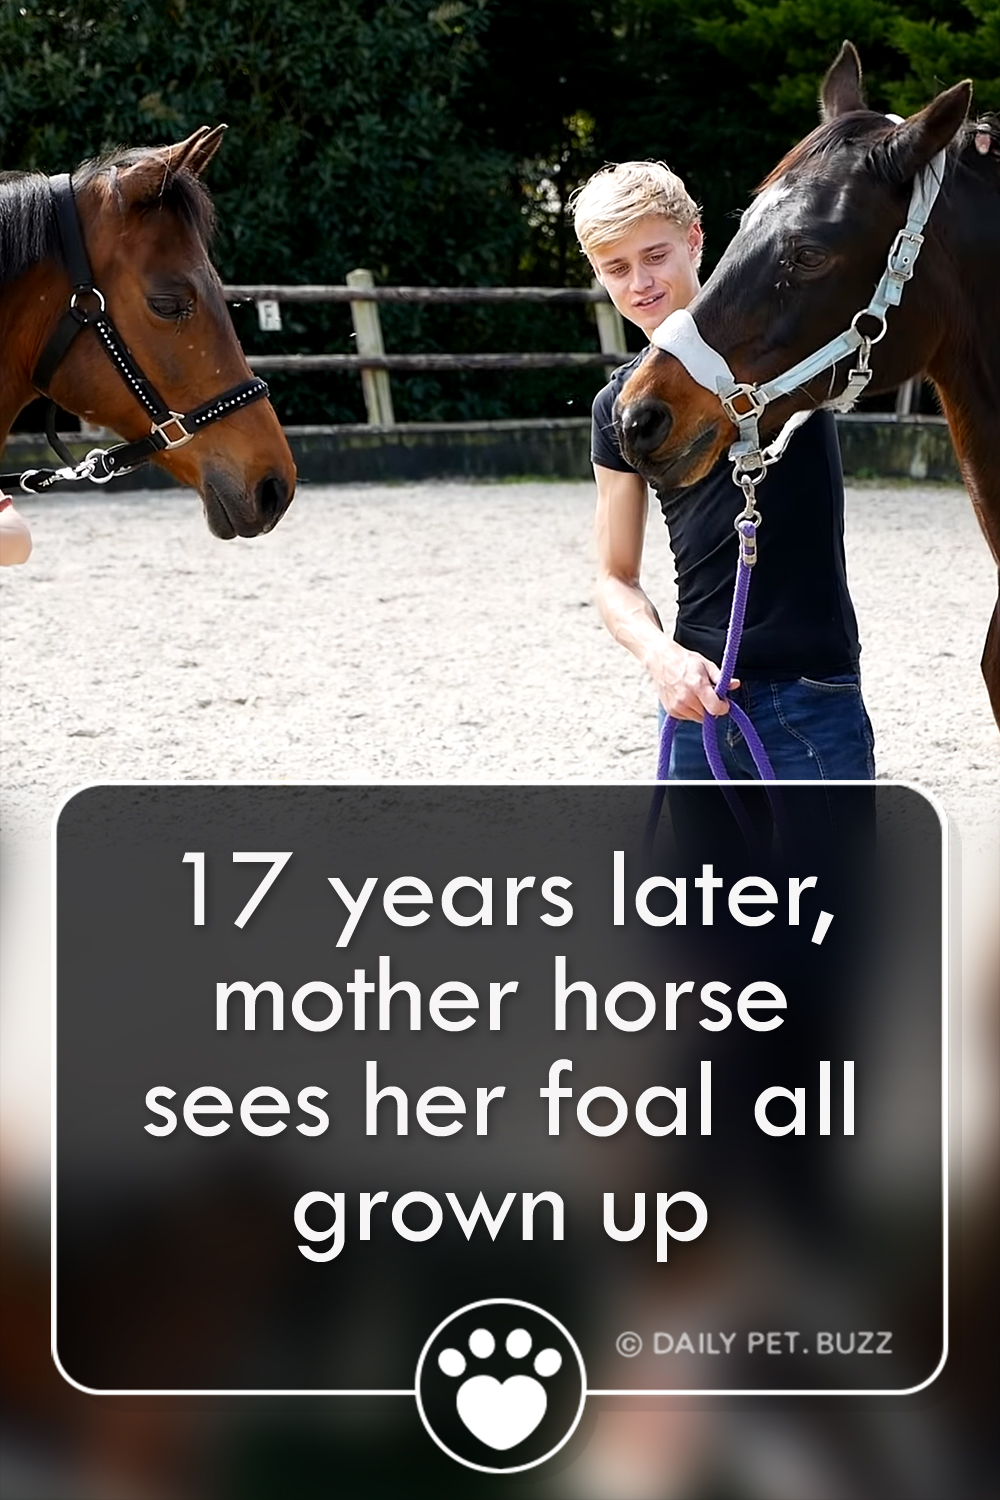 17 years later, mother horse sees her foal all grown up